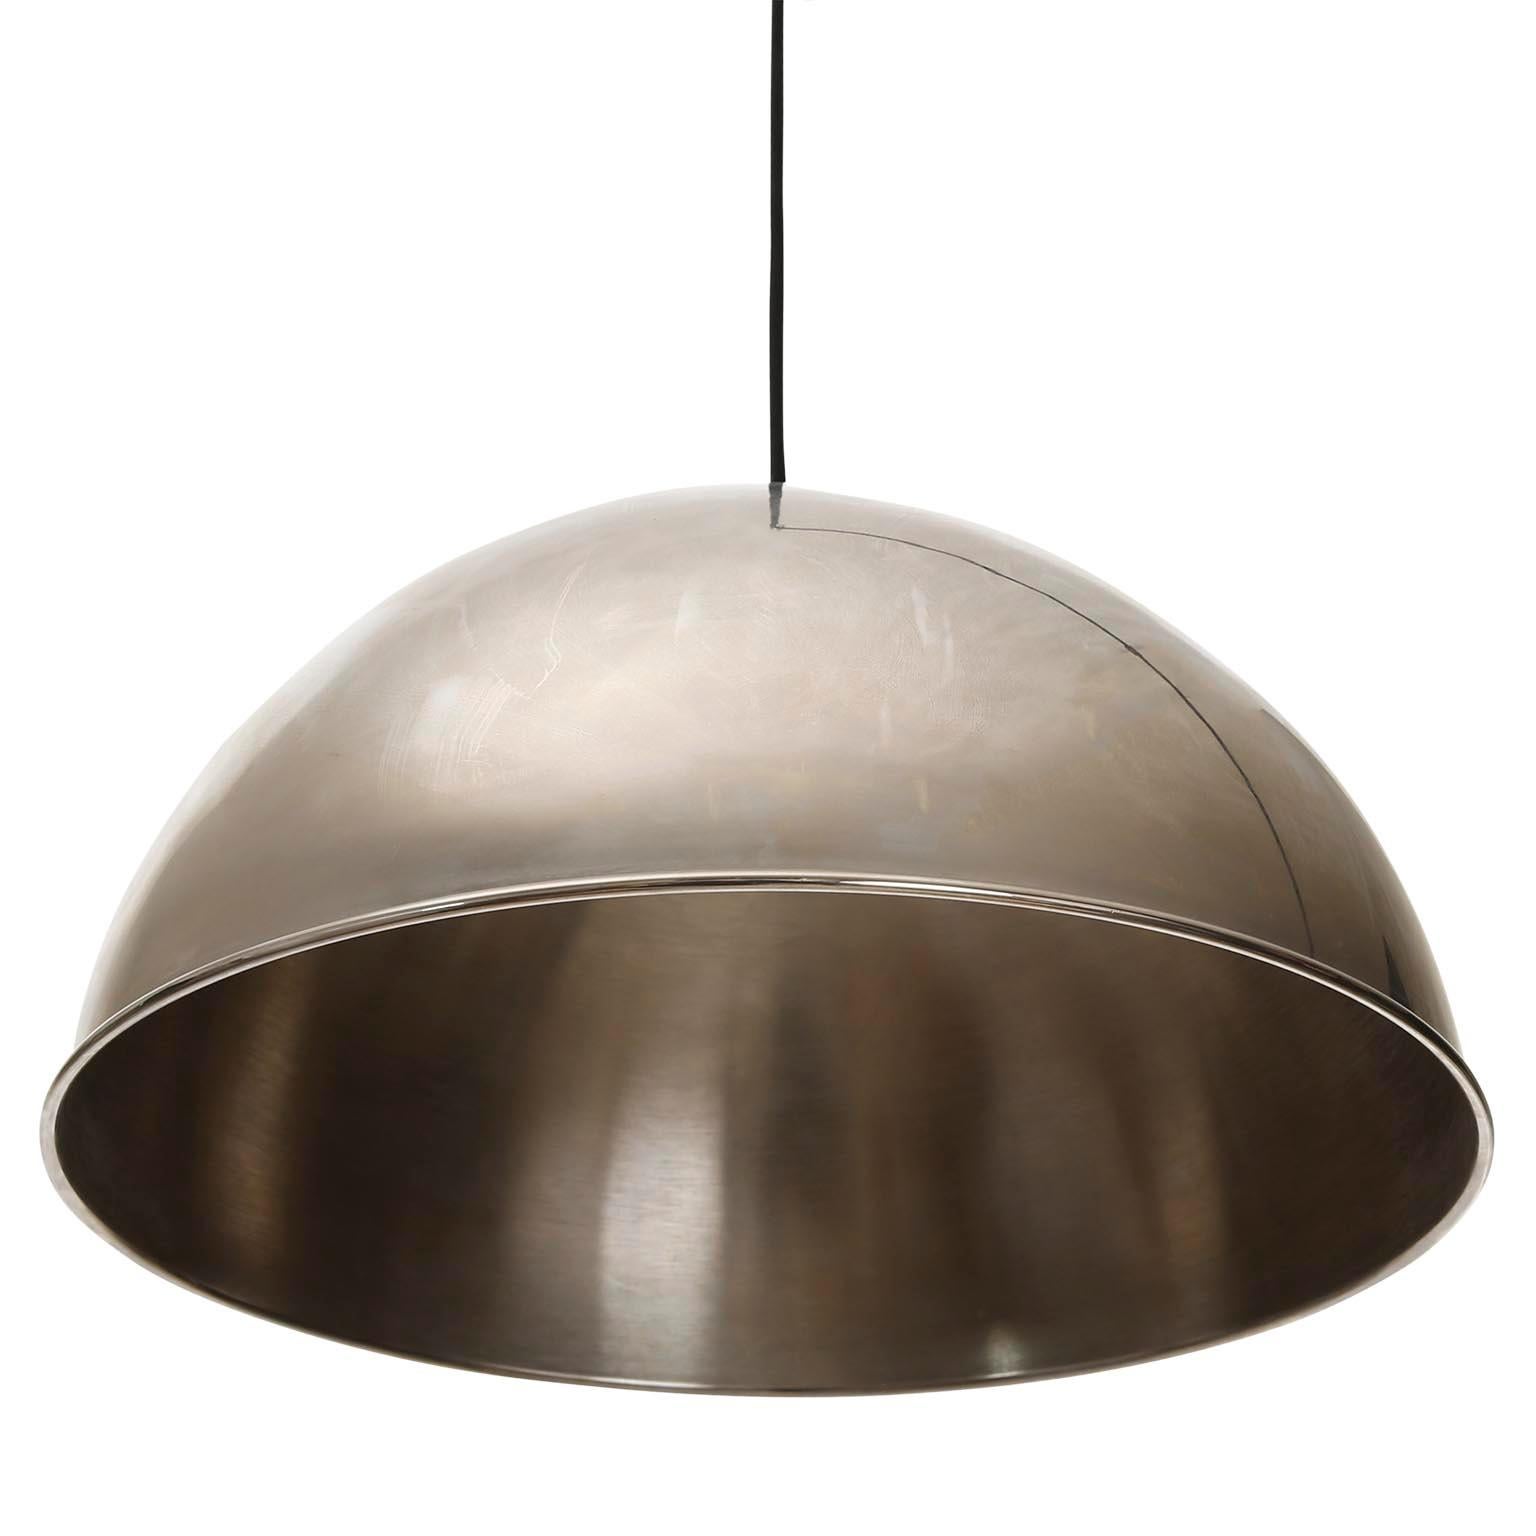 Plated Florian Schulz Dome Pendant Light, Patinated Nickel, Counterweight, 1970